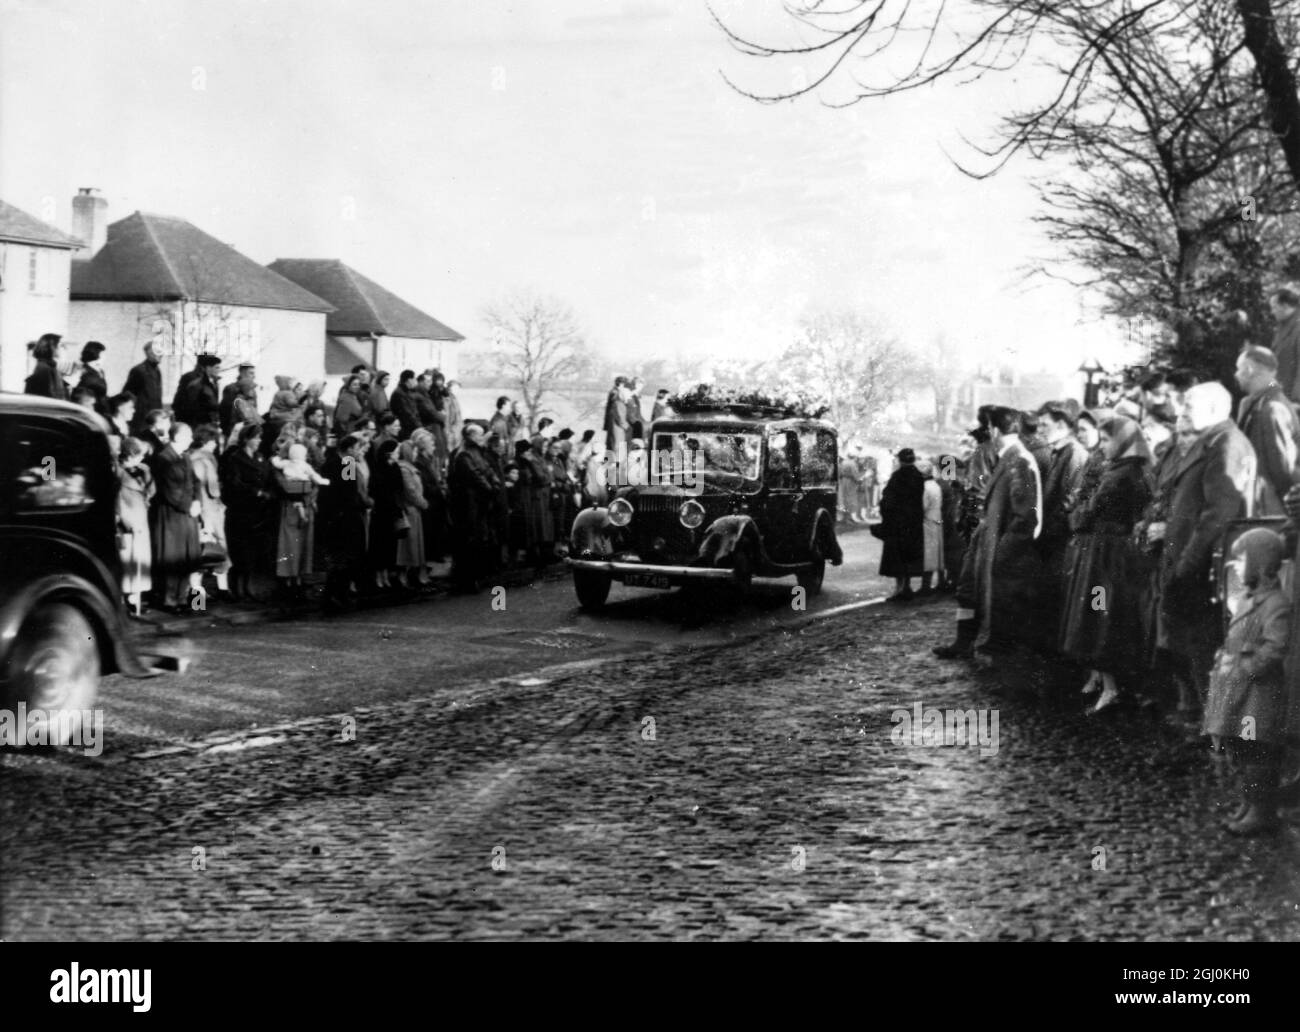 Hundreds of friends and supporters of Roger Byrne, the Captain of Manchester United football team, line the route taken by his hearse. He was killed in the tragic air disaster in Munich, Germany. 12th February, 1958 Stock Photo